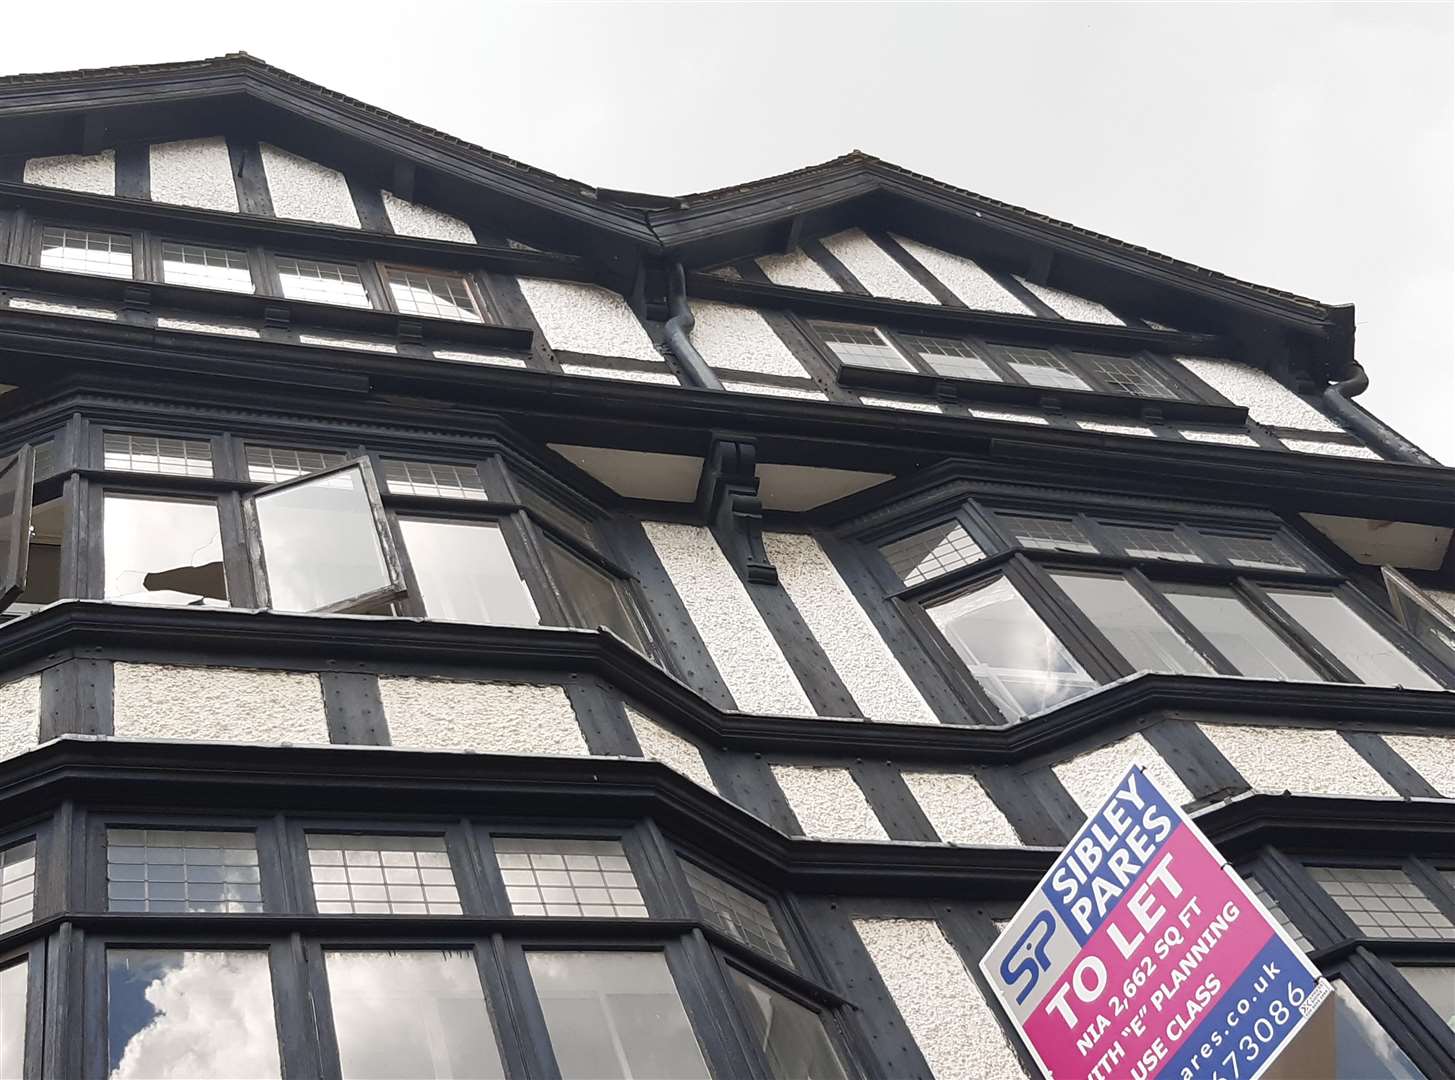 The timber is thought to have fallen from the front of the building, at the base of the top floor